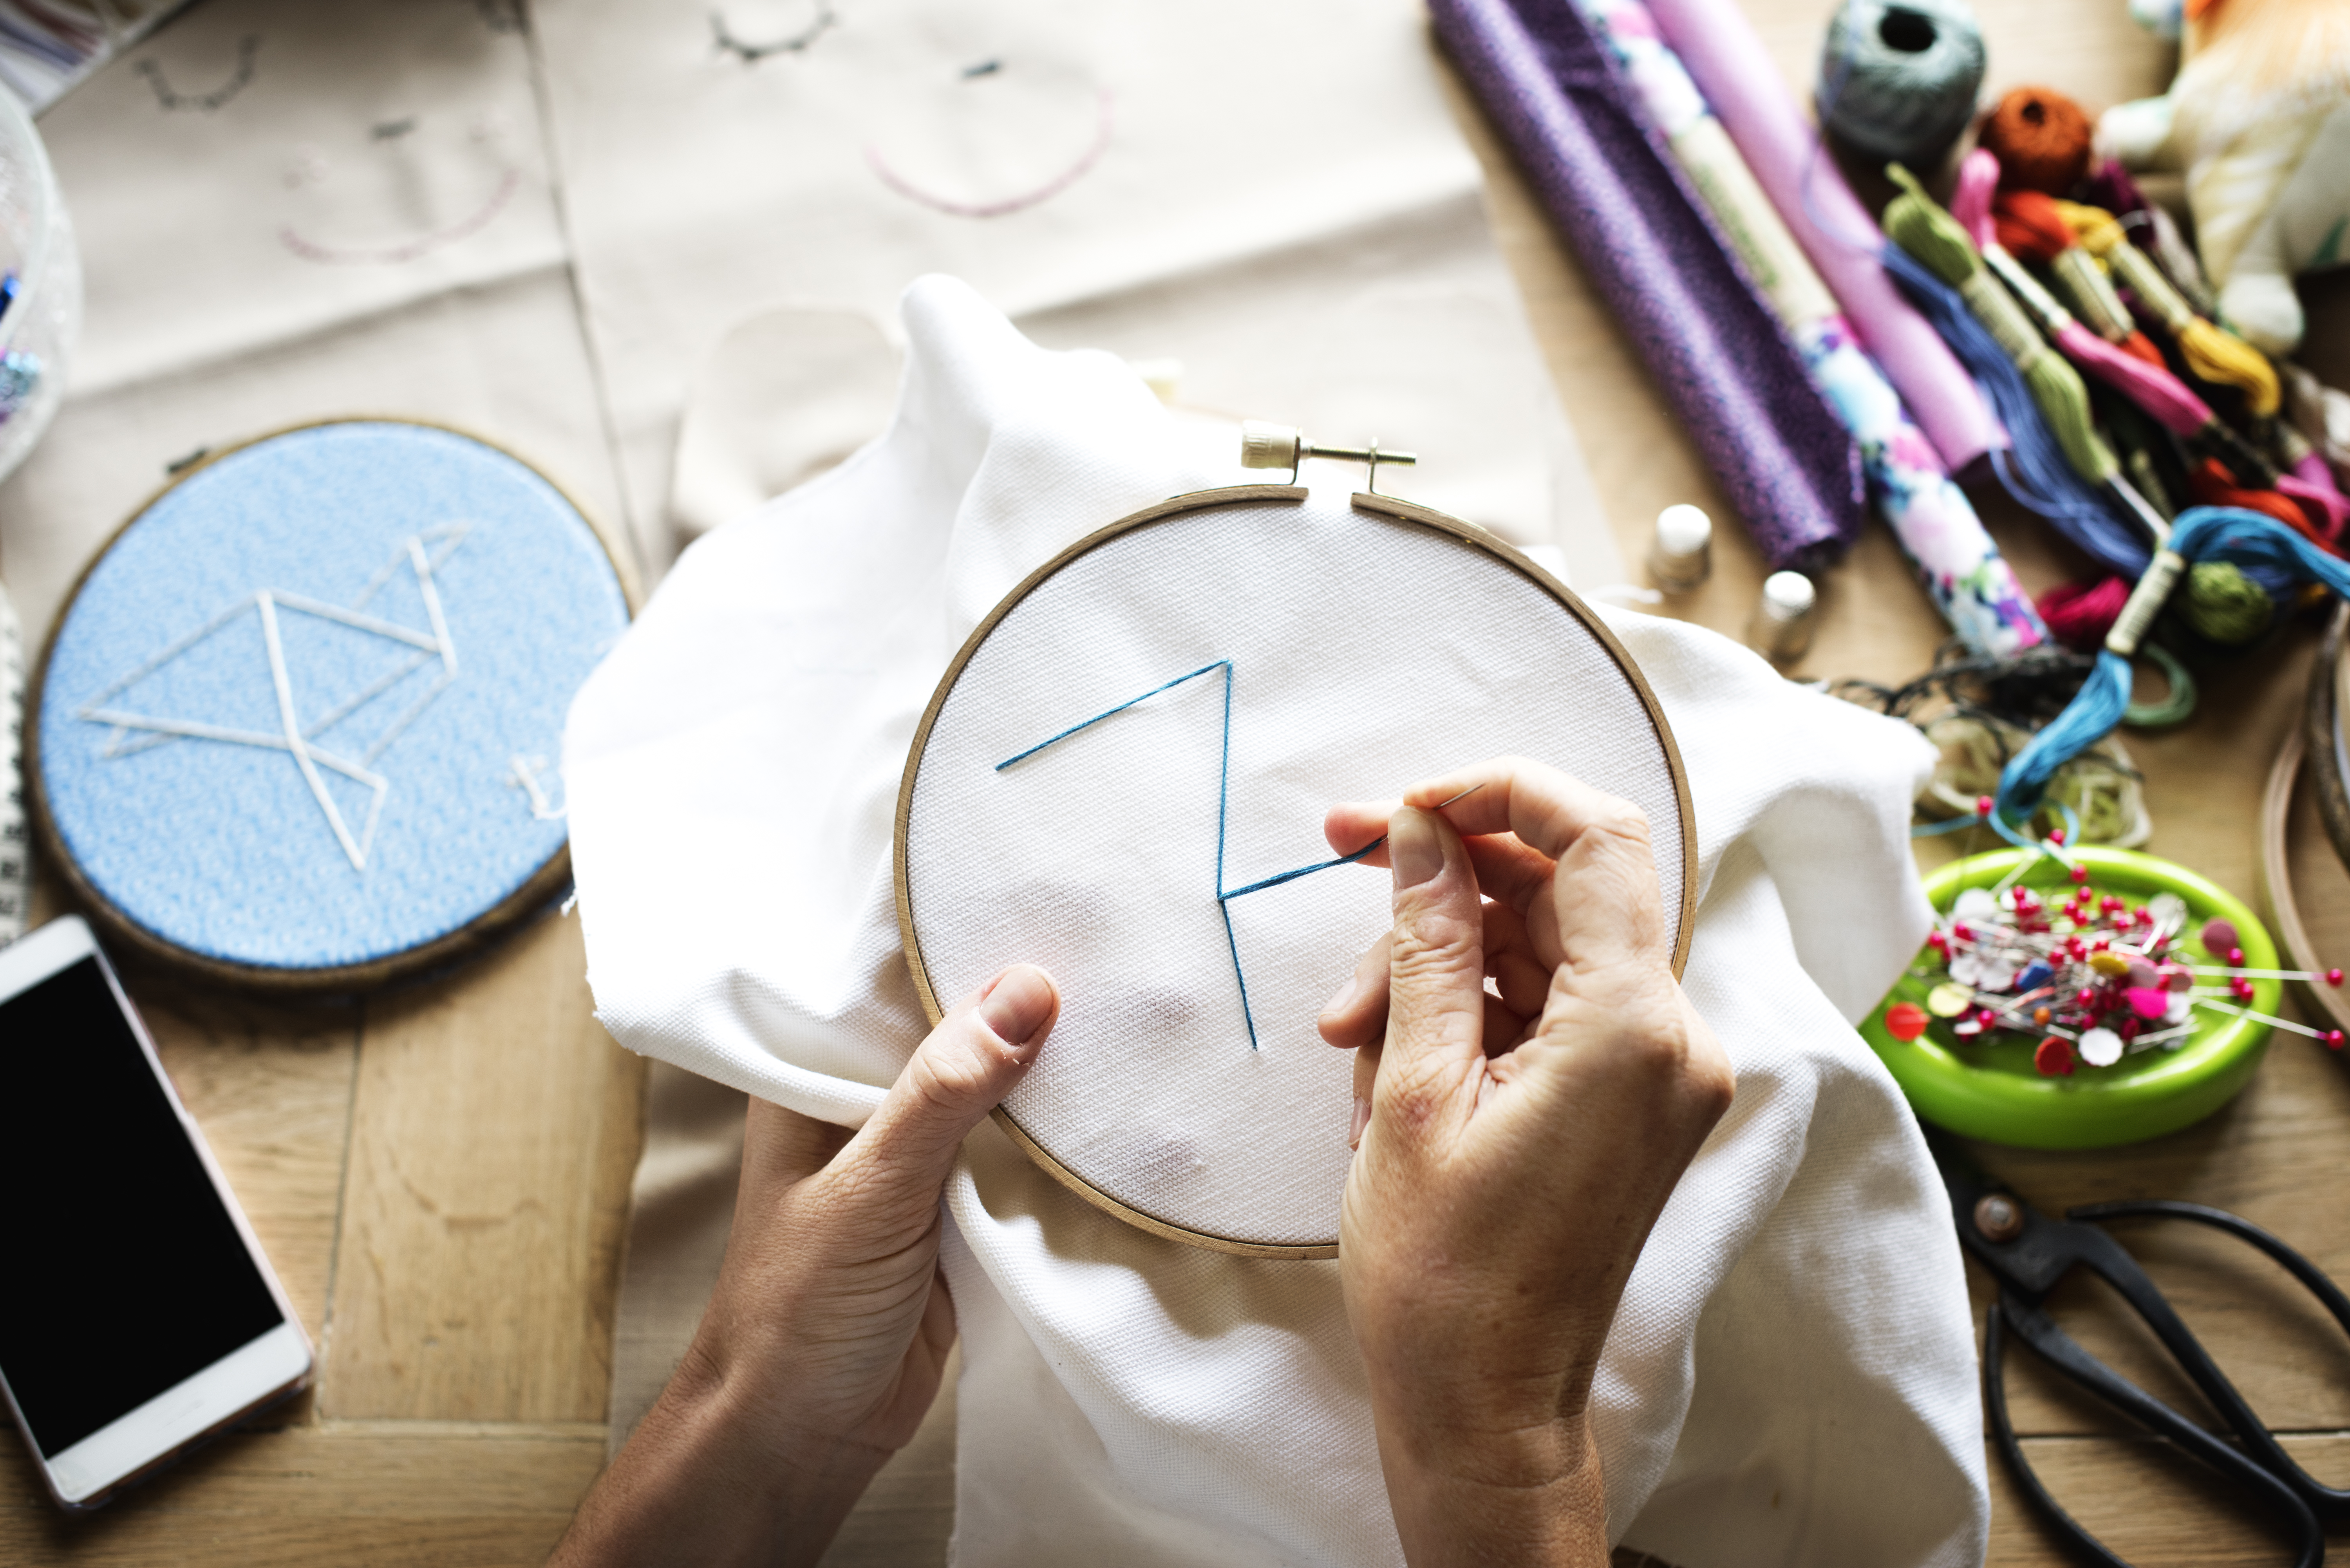 a person working on an embroidery project